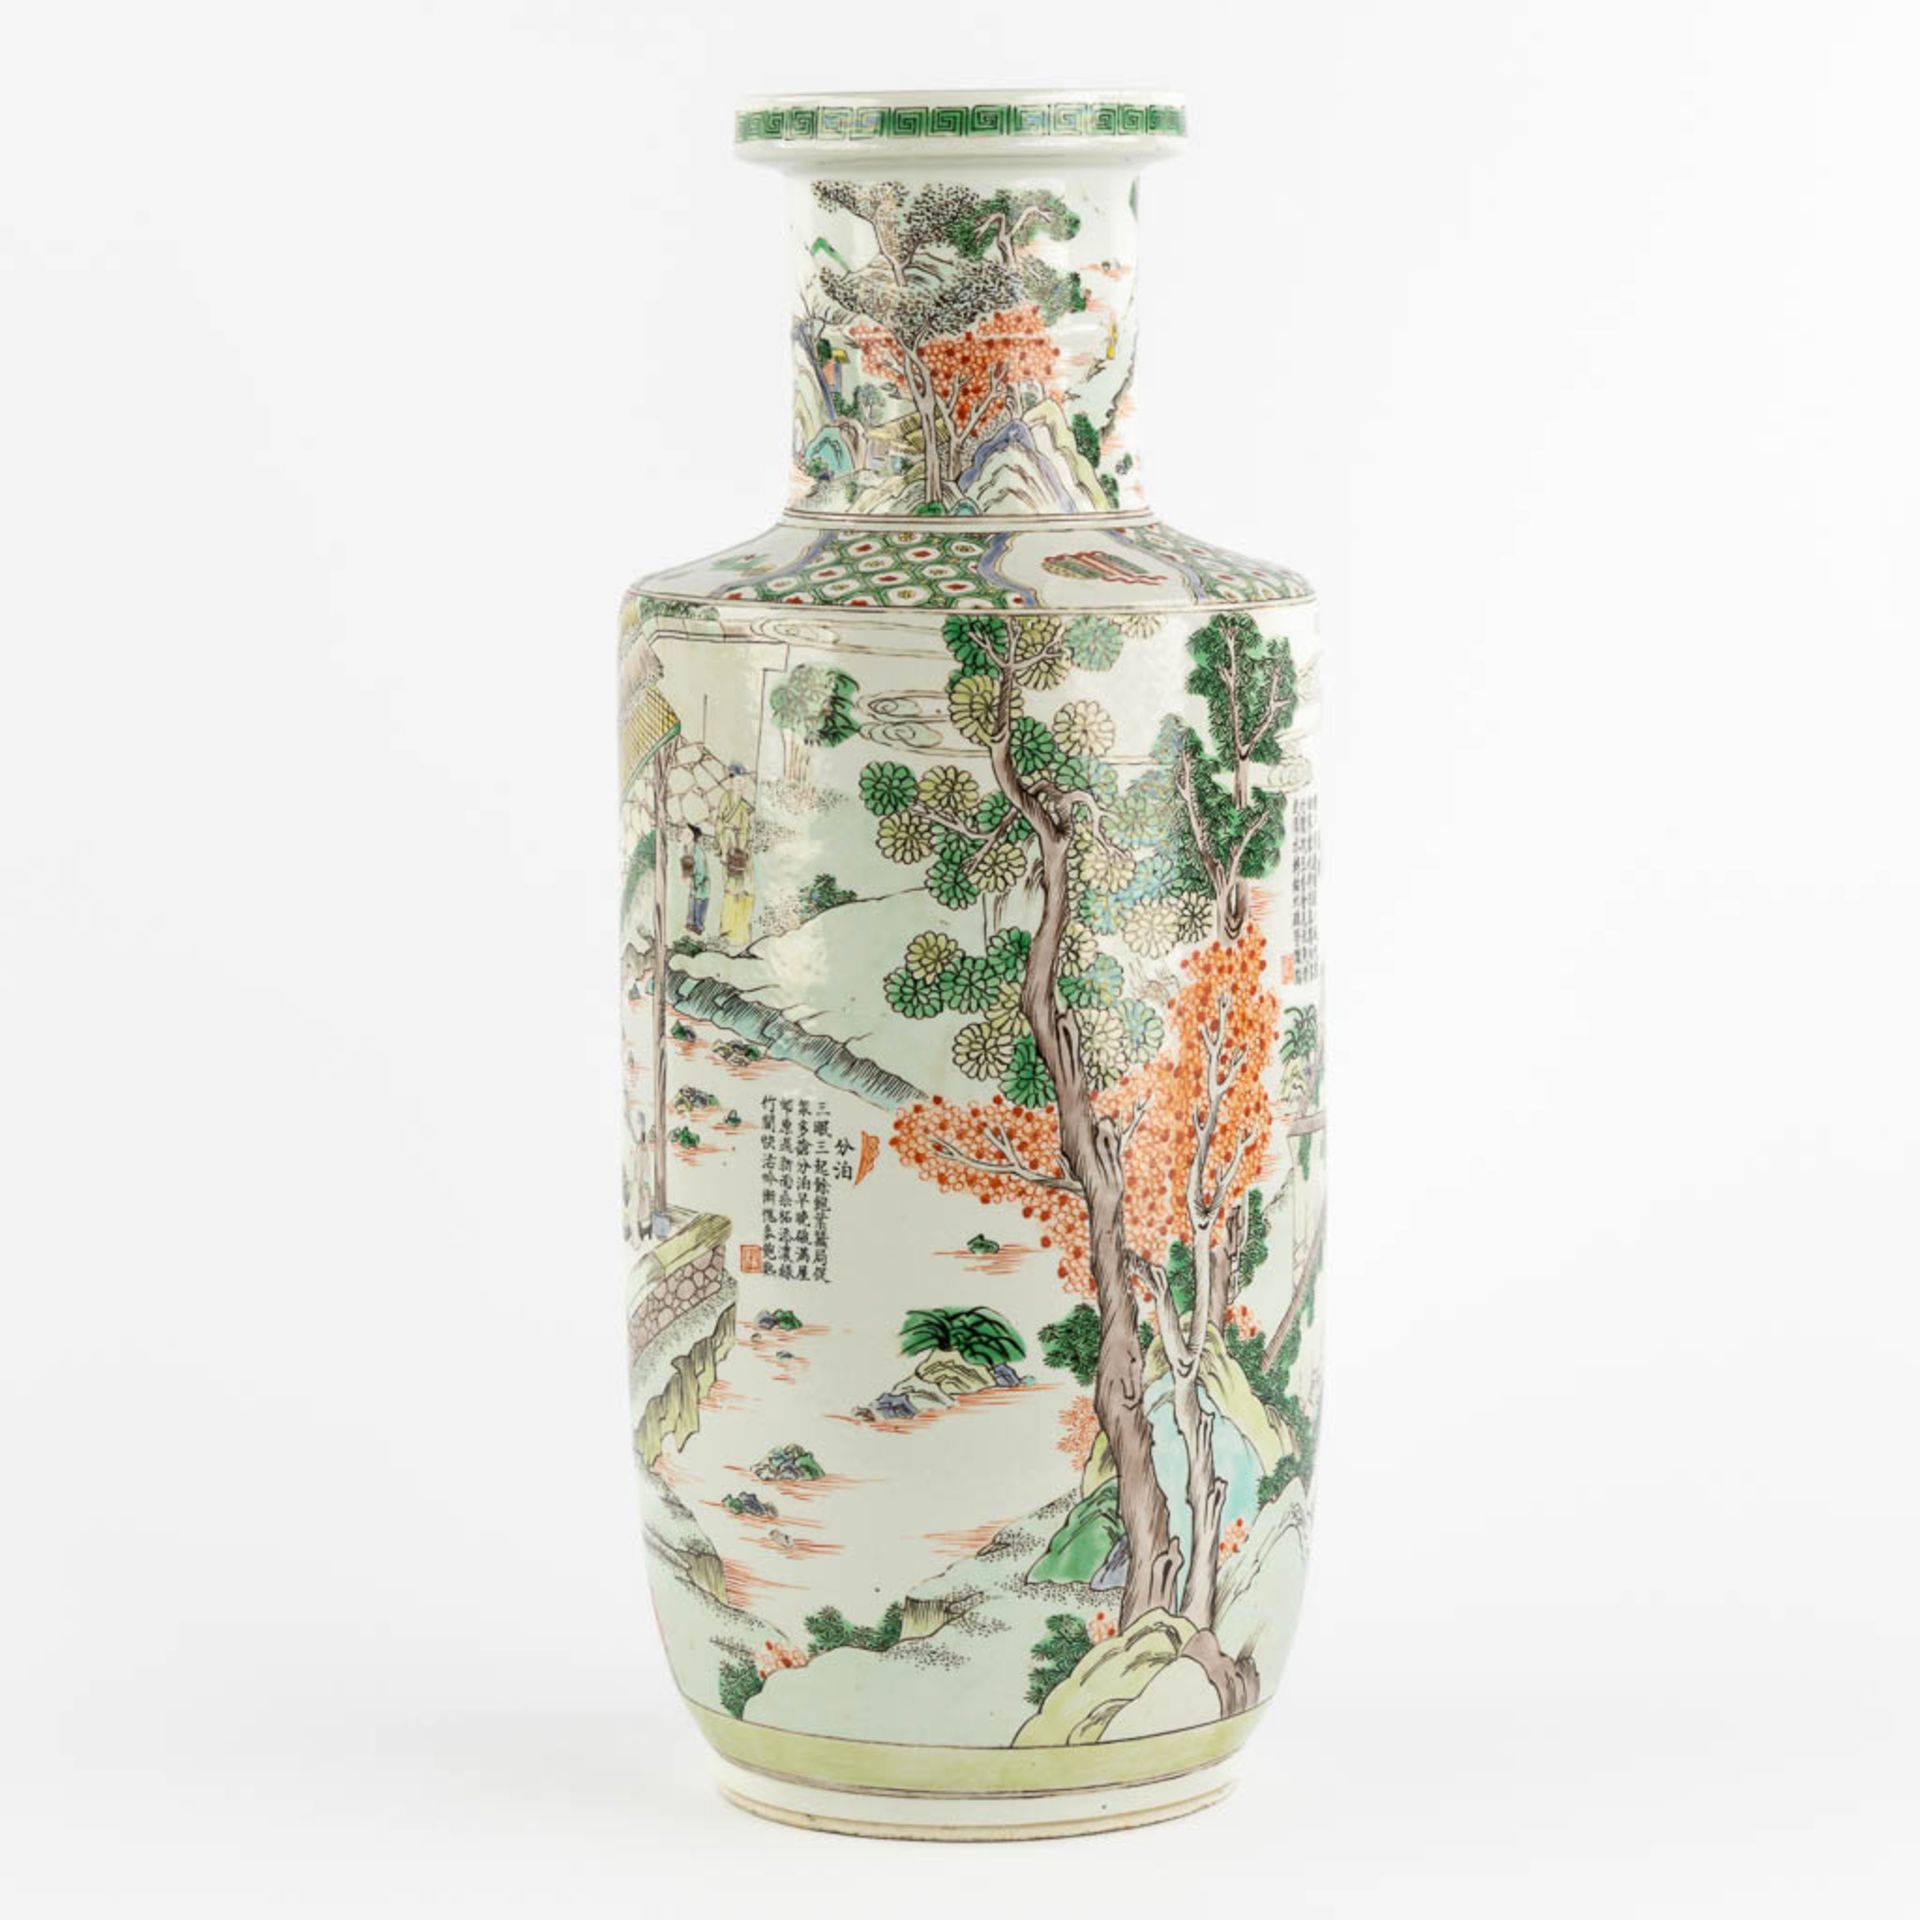 A Chinese Famille Verte 'Roulleau' vase with scènes of rice production. (H:46 x D:18 cm) - Image 4 of 13